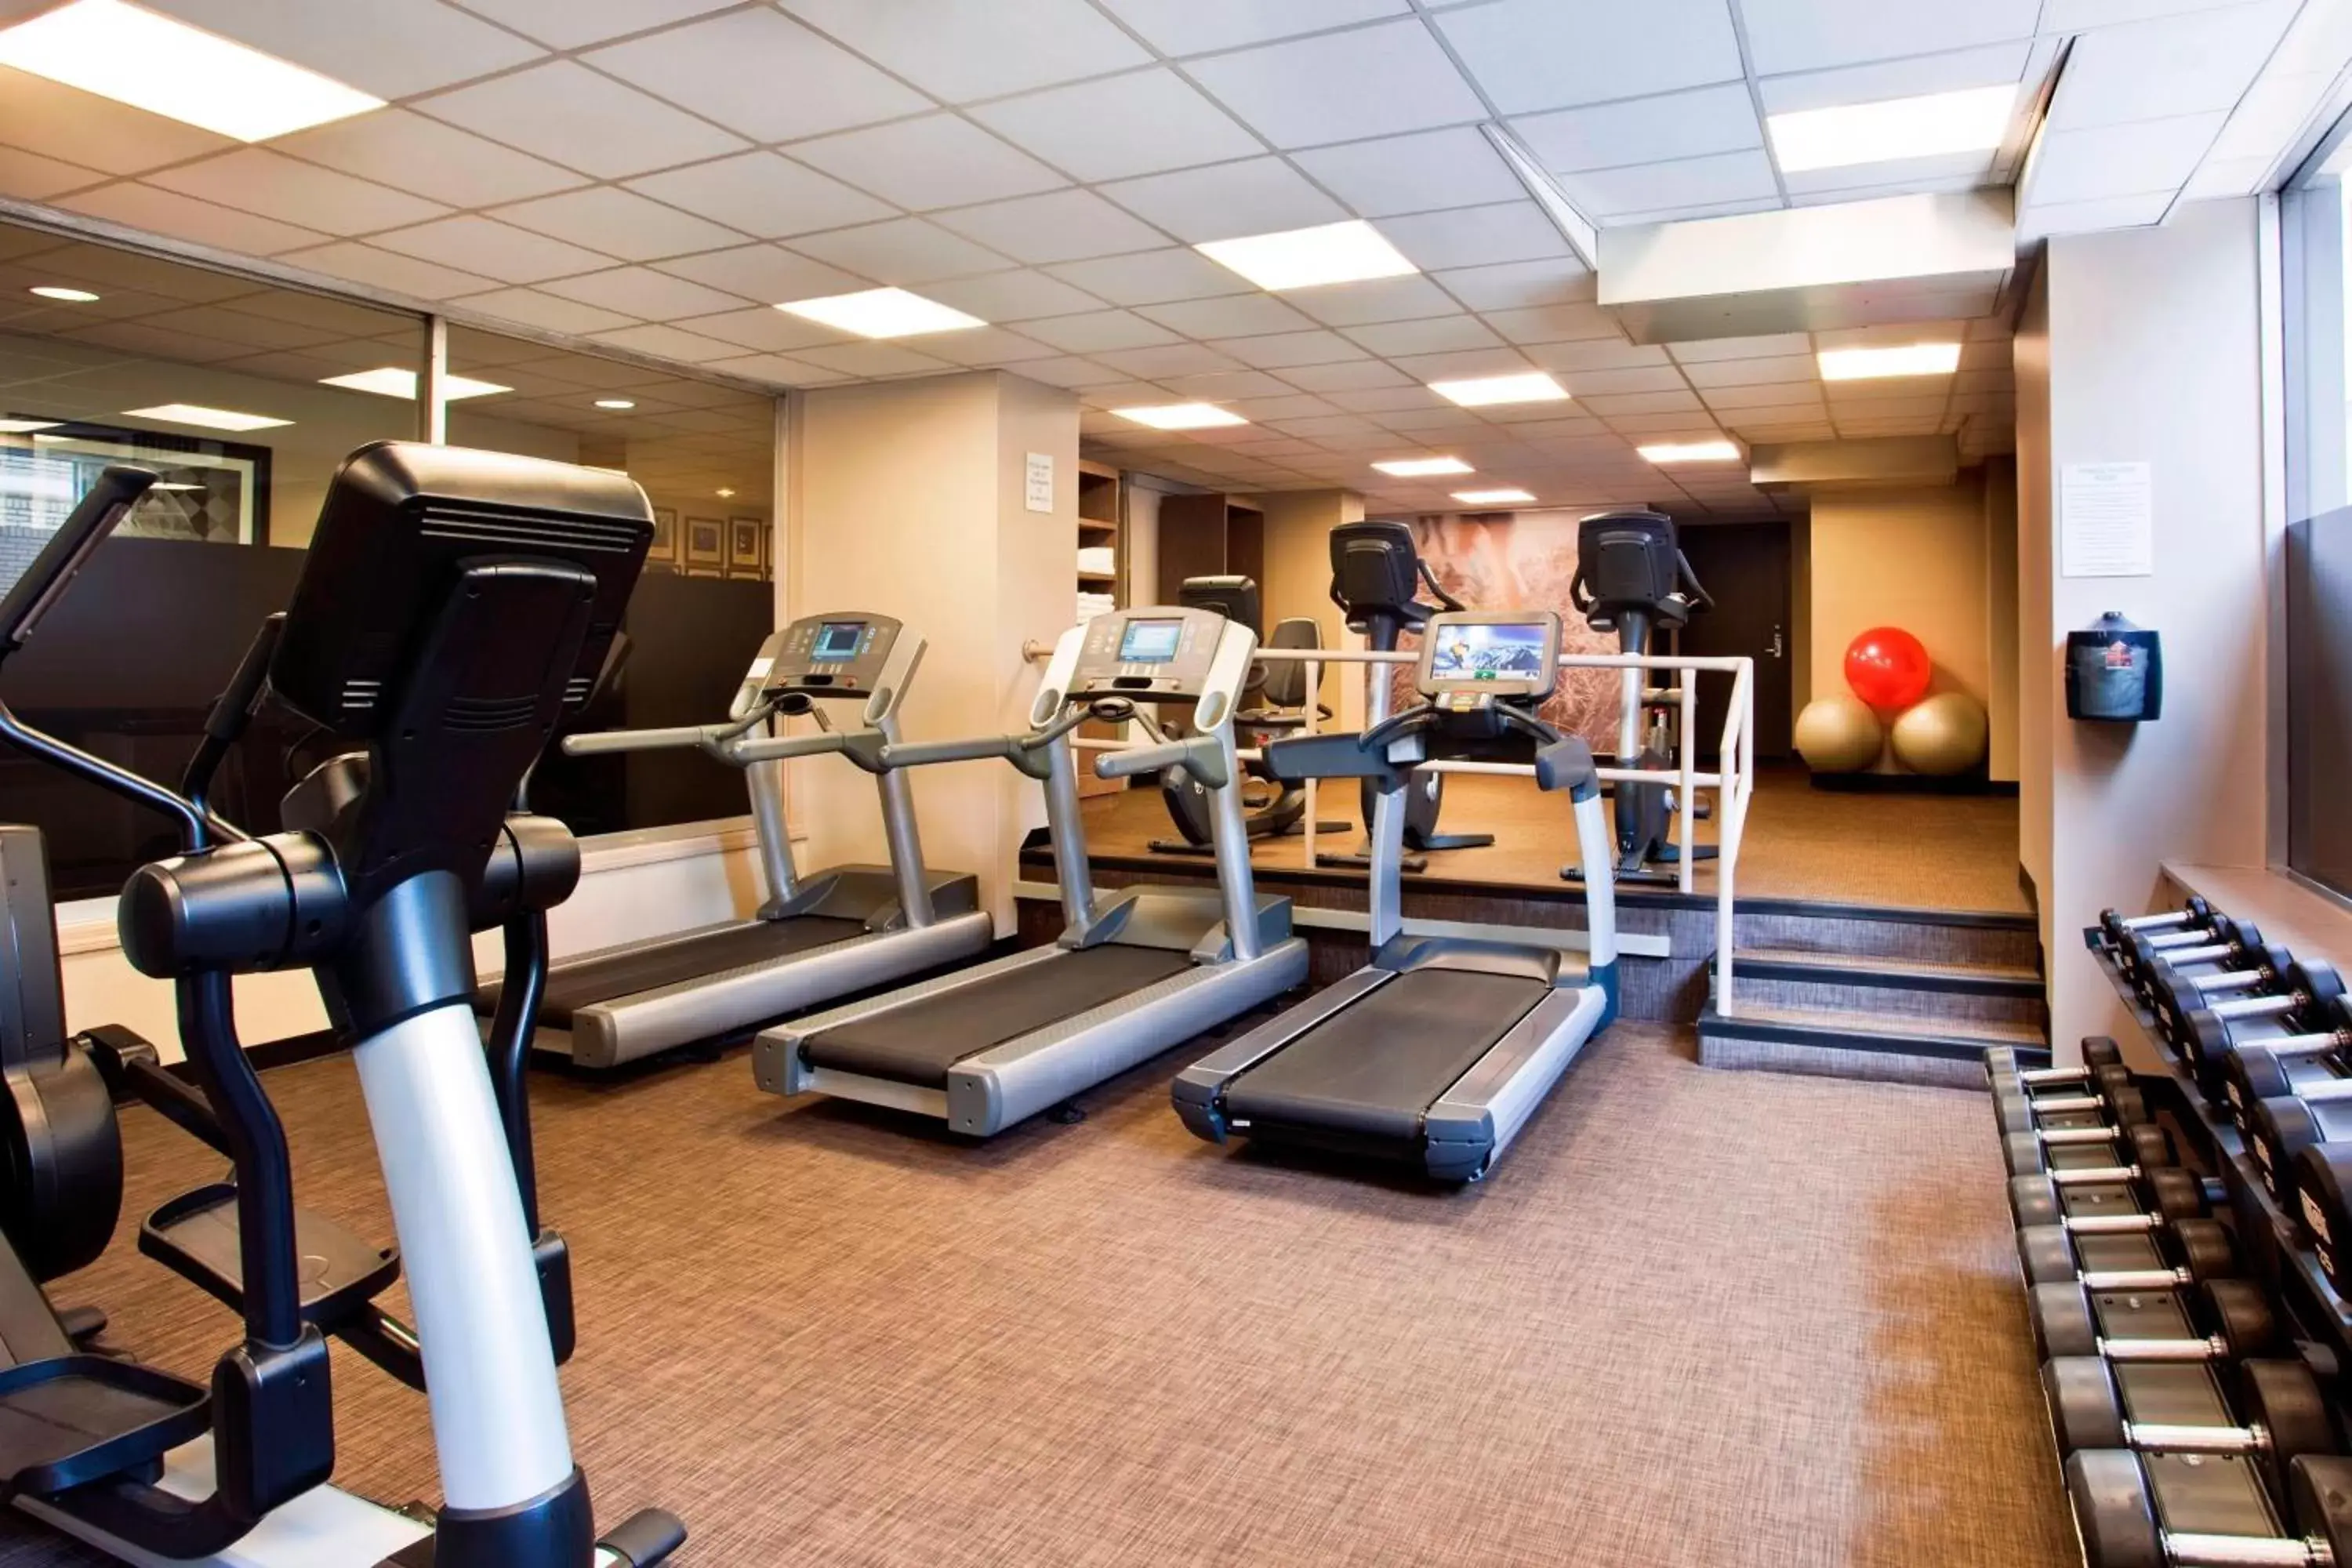 Fitness centre/facilities, Fitness Center/Facilities in The Westin Poinsett, Greenville